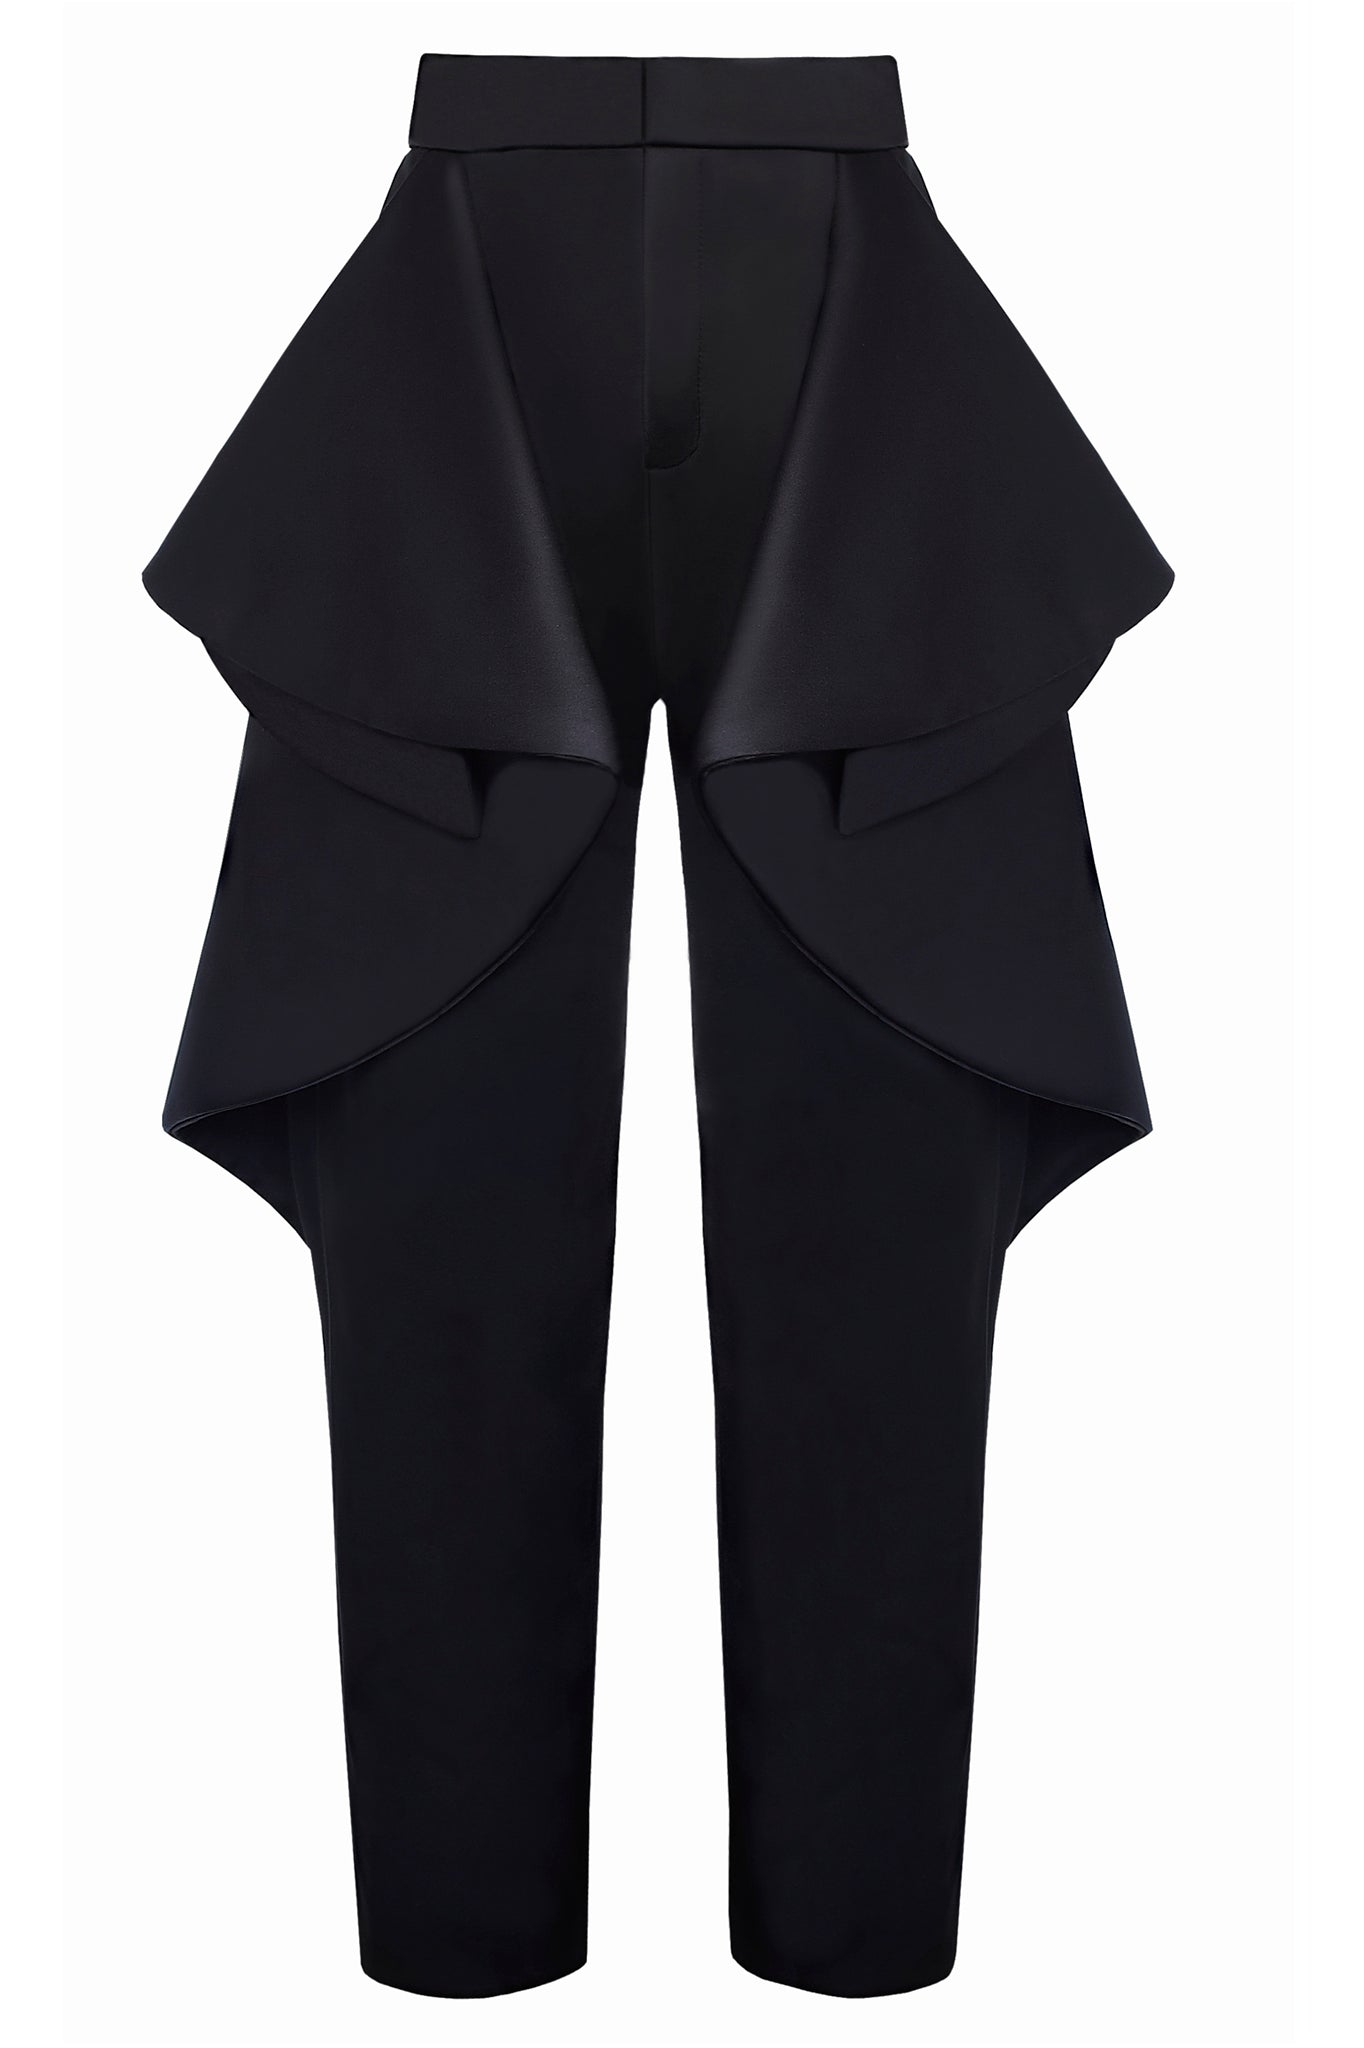 The Cimone AW17 “Smoulder” pant is a artful mix between a trouser and a skirt, with an elegant two-tone side drape. These trousers are a dramatic statement!